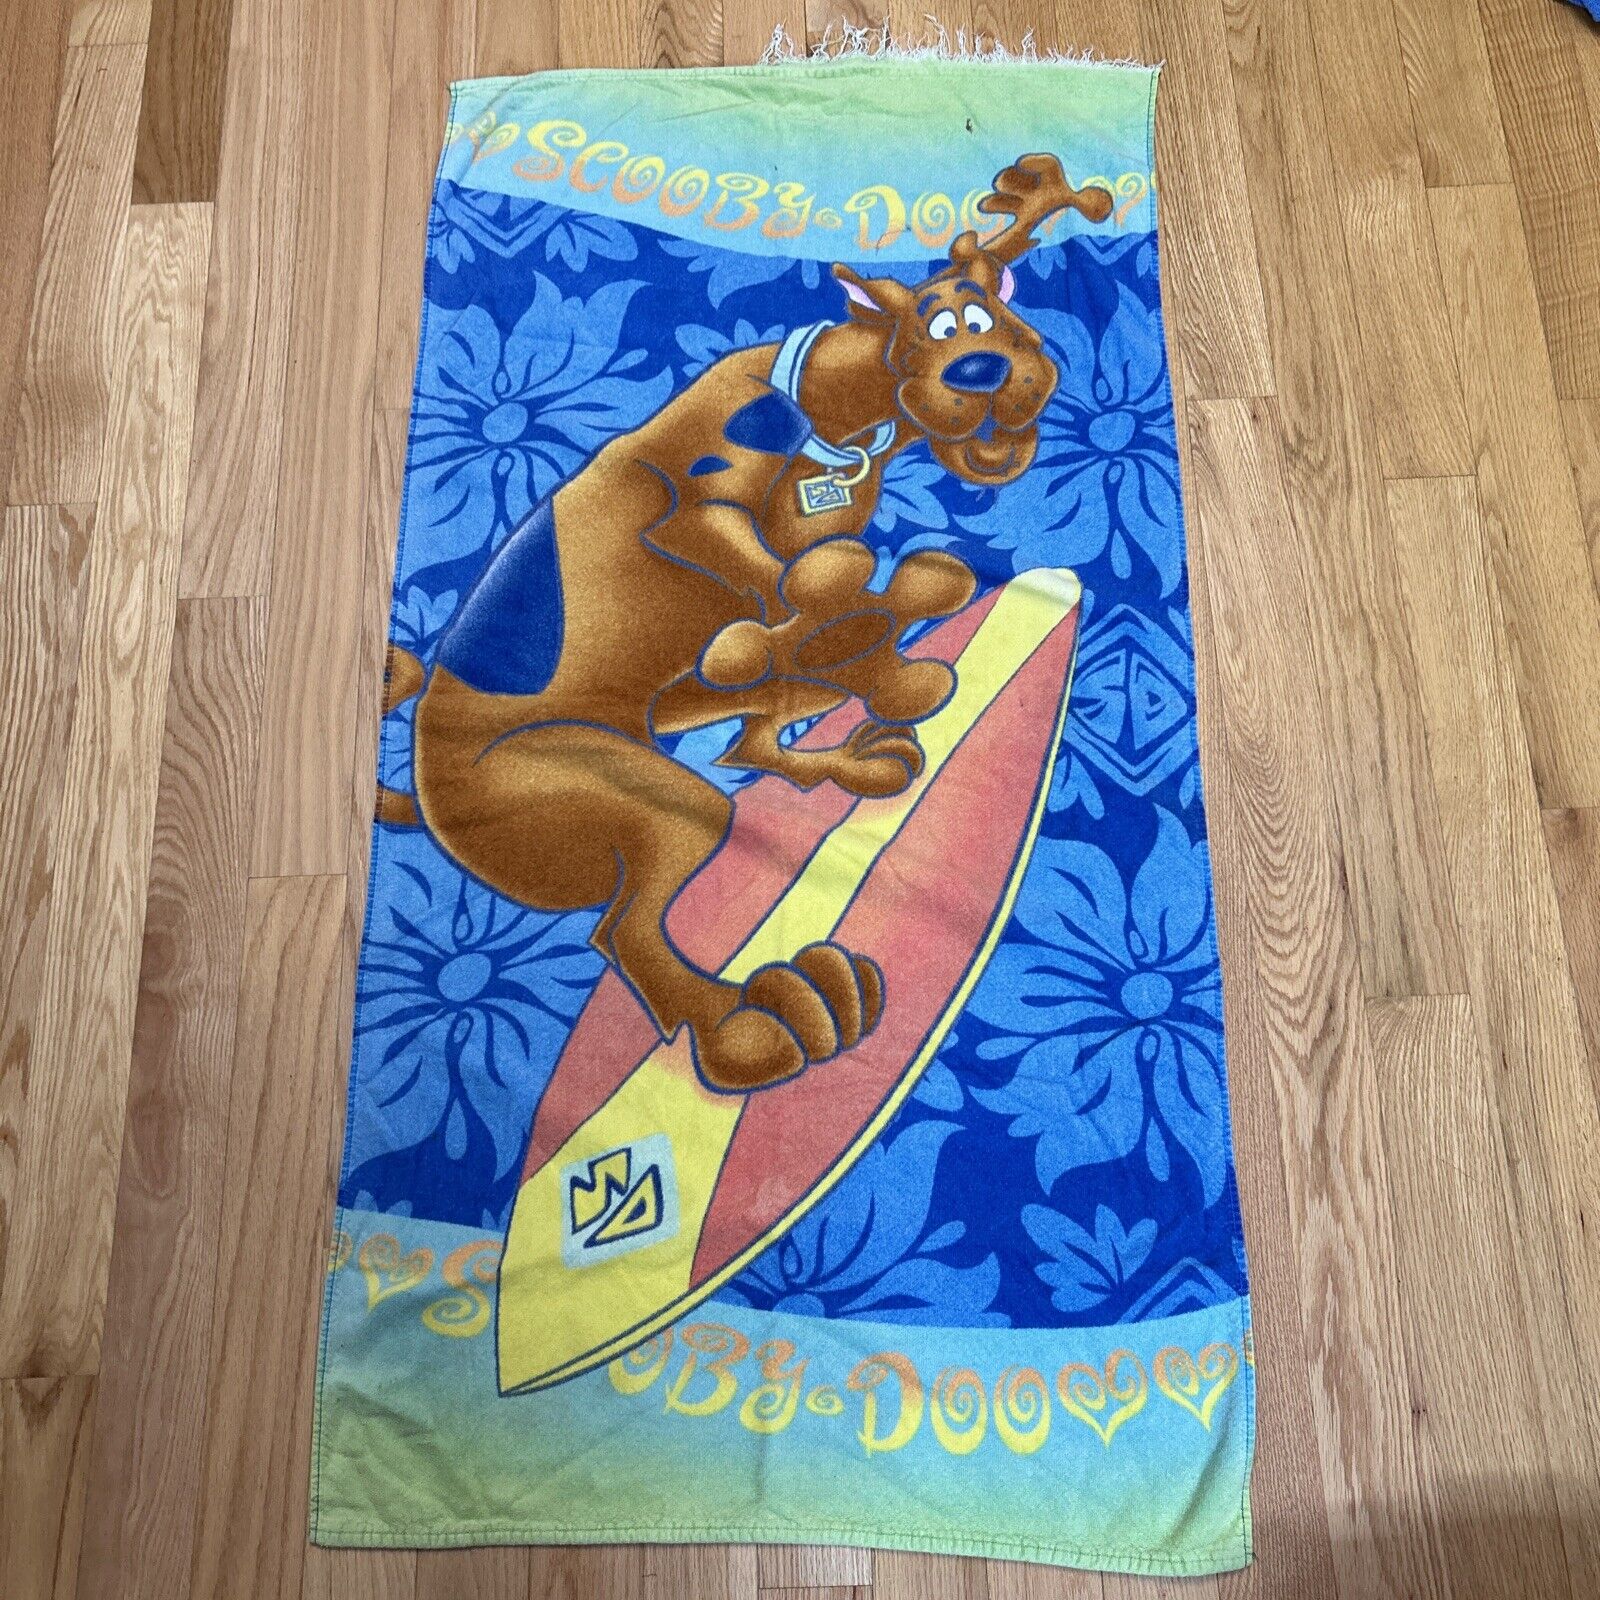 Vintage Scooby Doo Beach Towel - Surf - Surfing Scooby Doo  Has Flaws